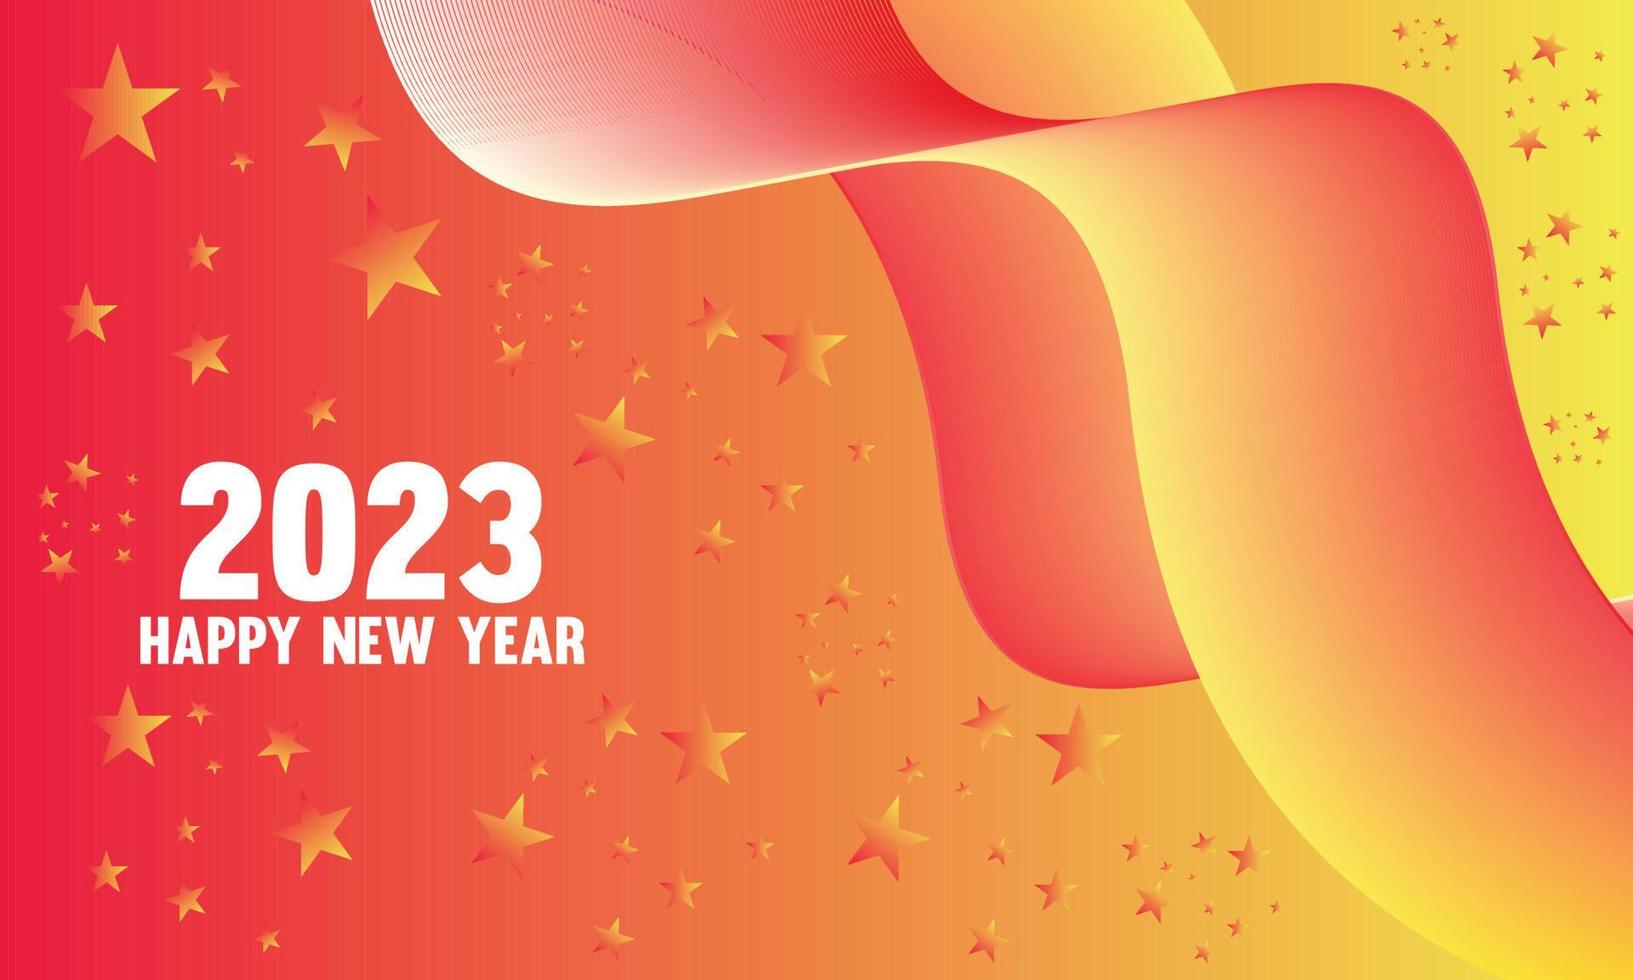 Happy New Year 2023 Free Vector Template Design